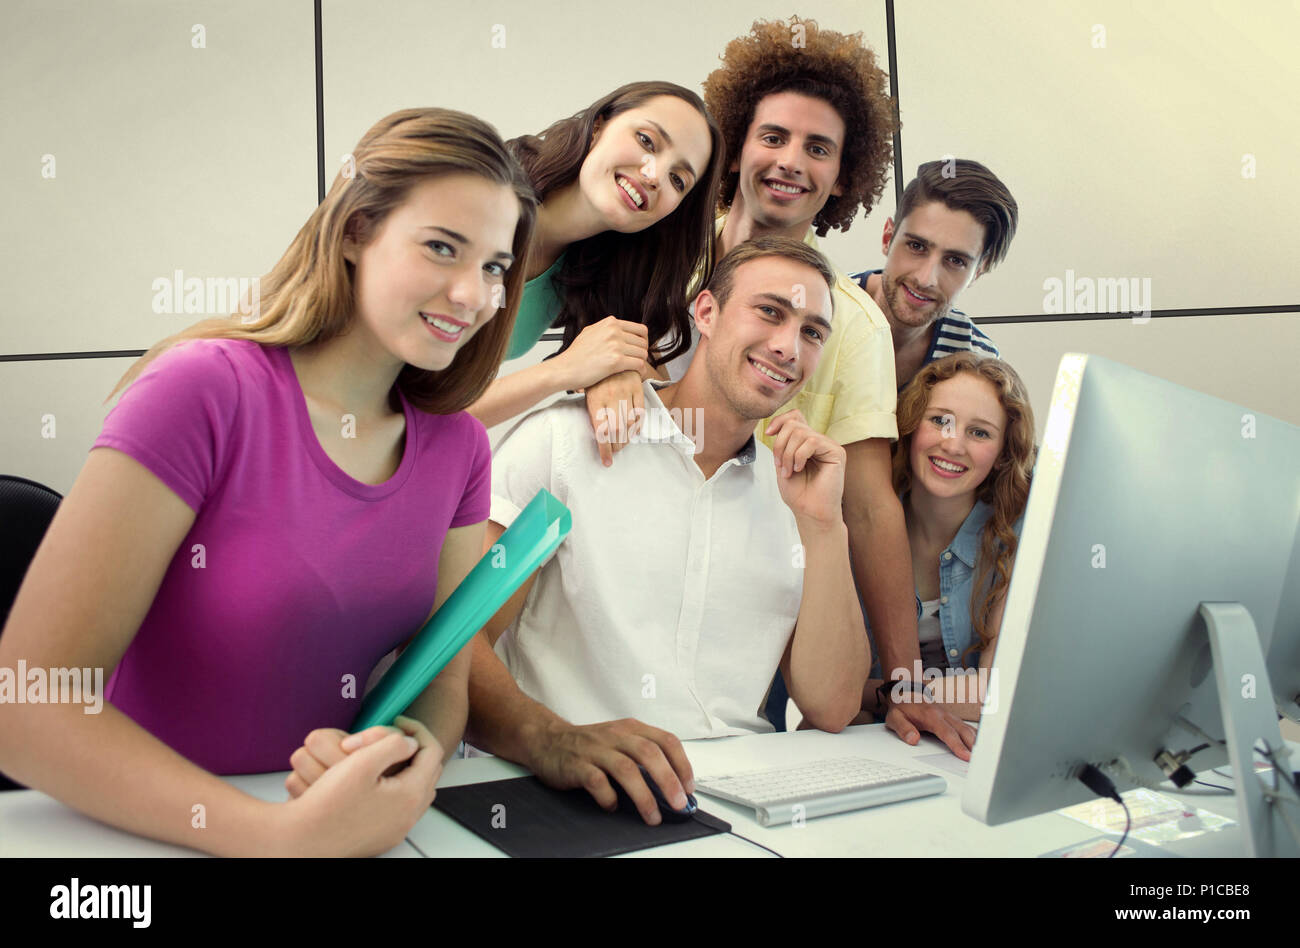 Composite image of smiling students in computer class Stock Photo